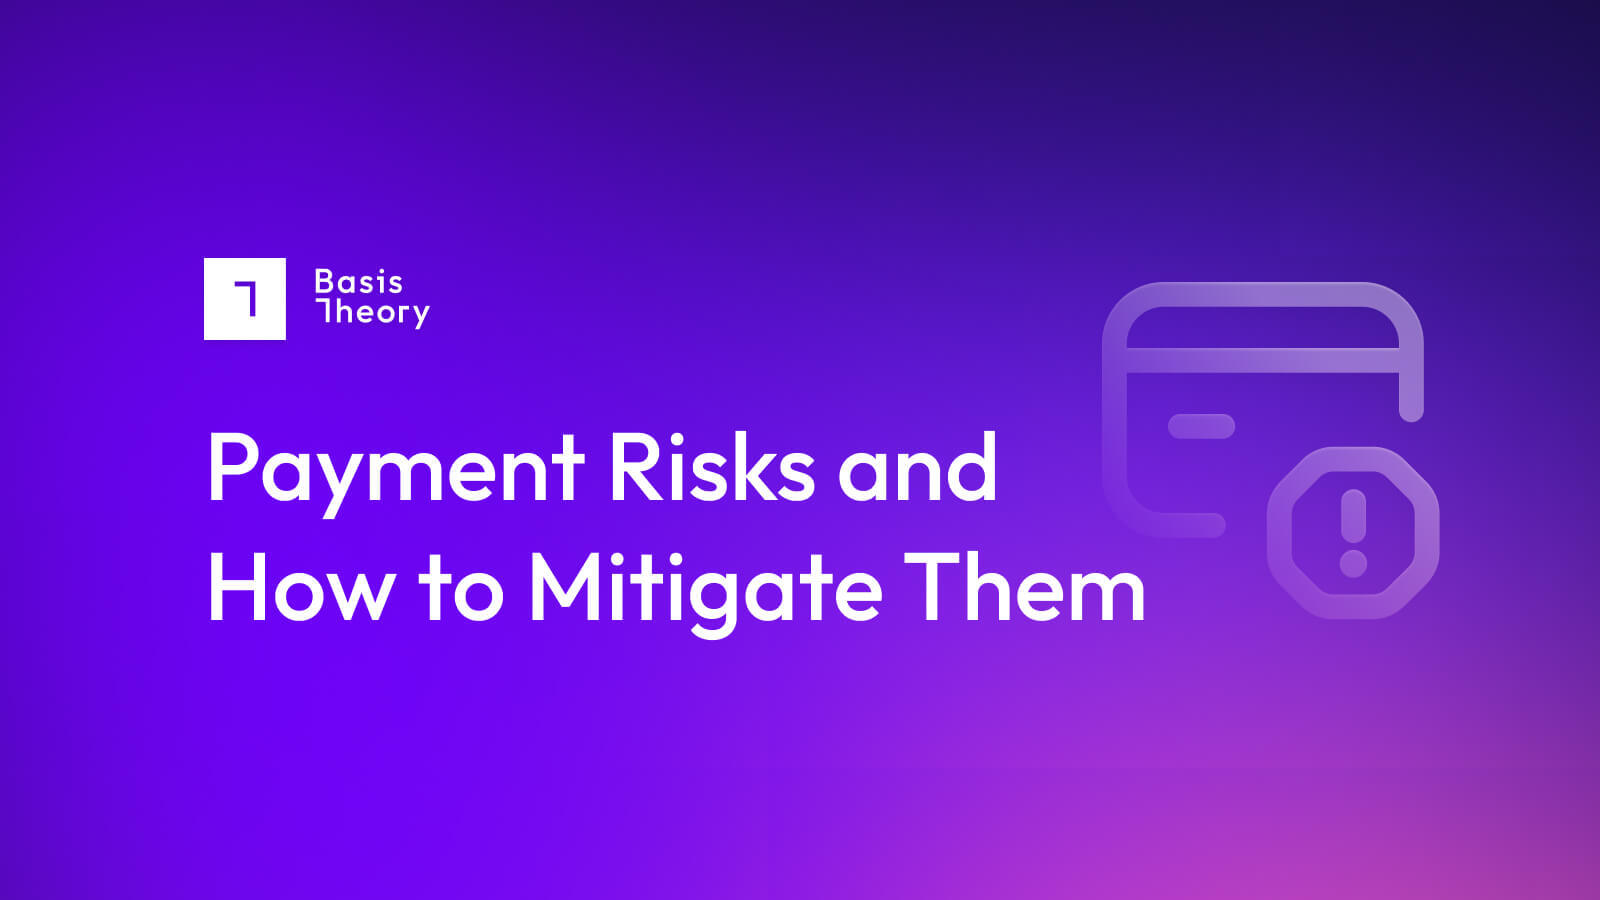 Payment risks and how to mitigate them